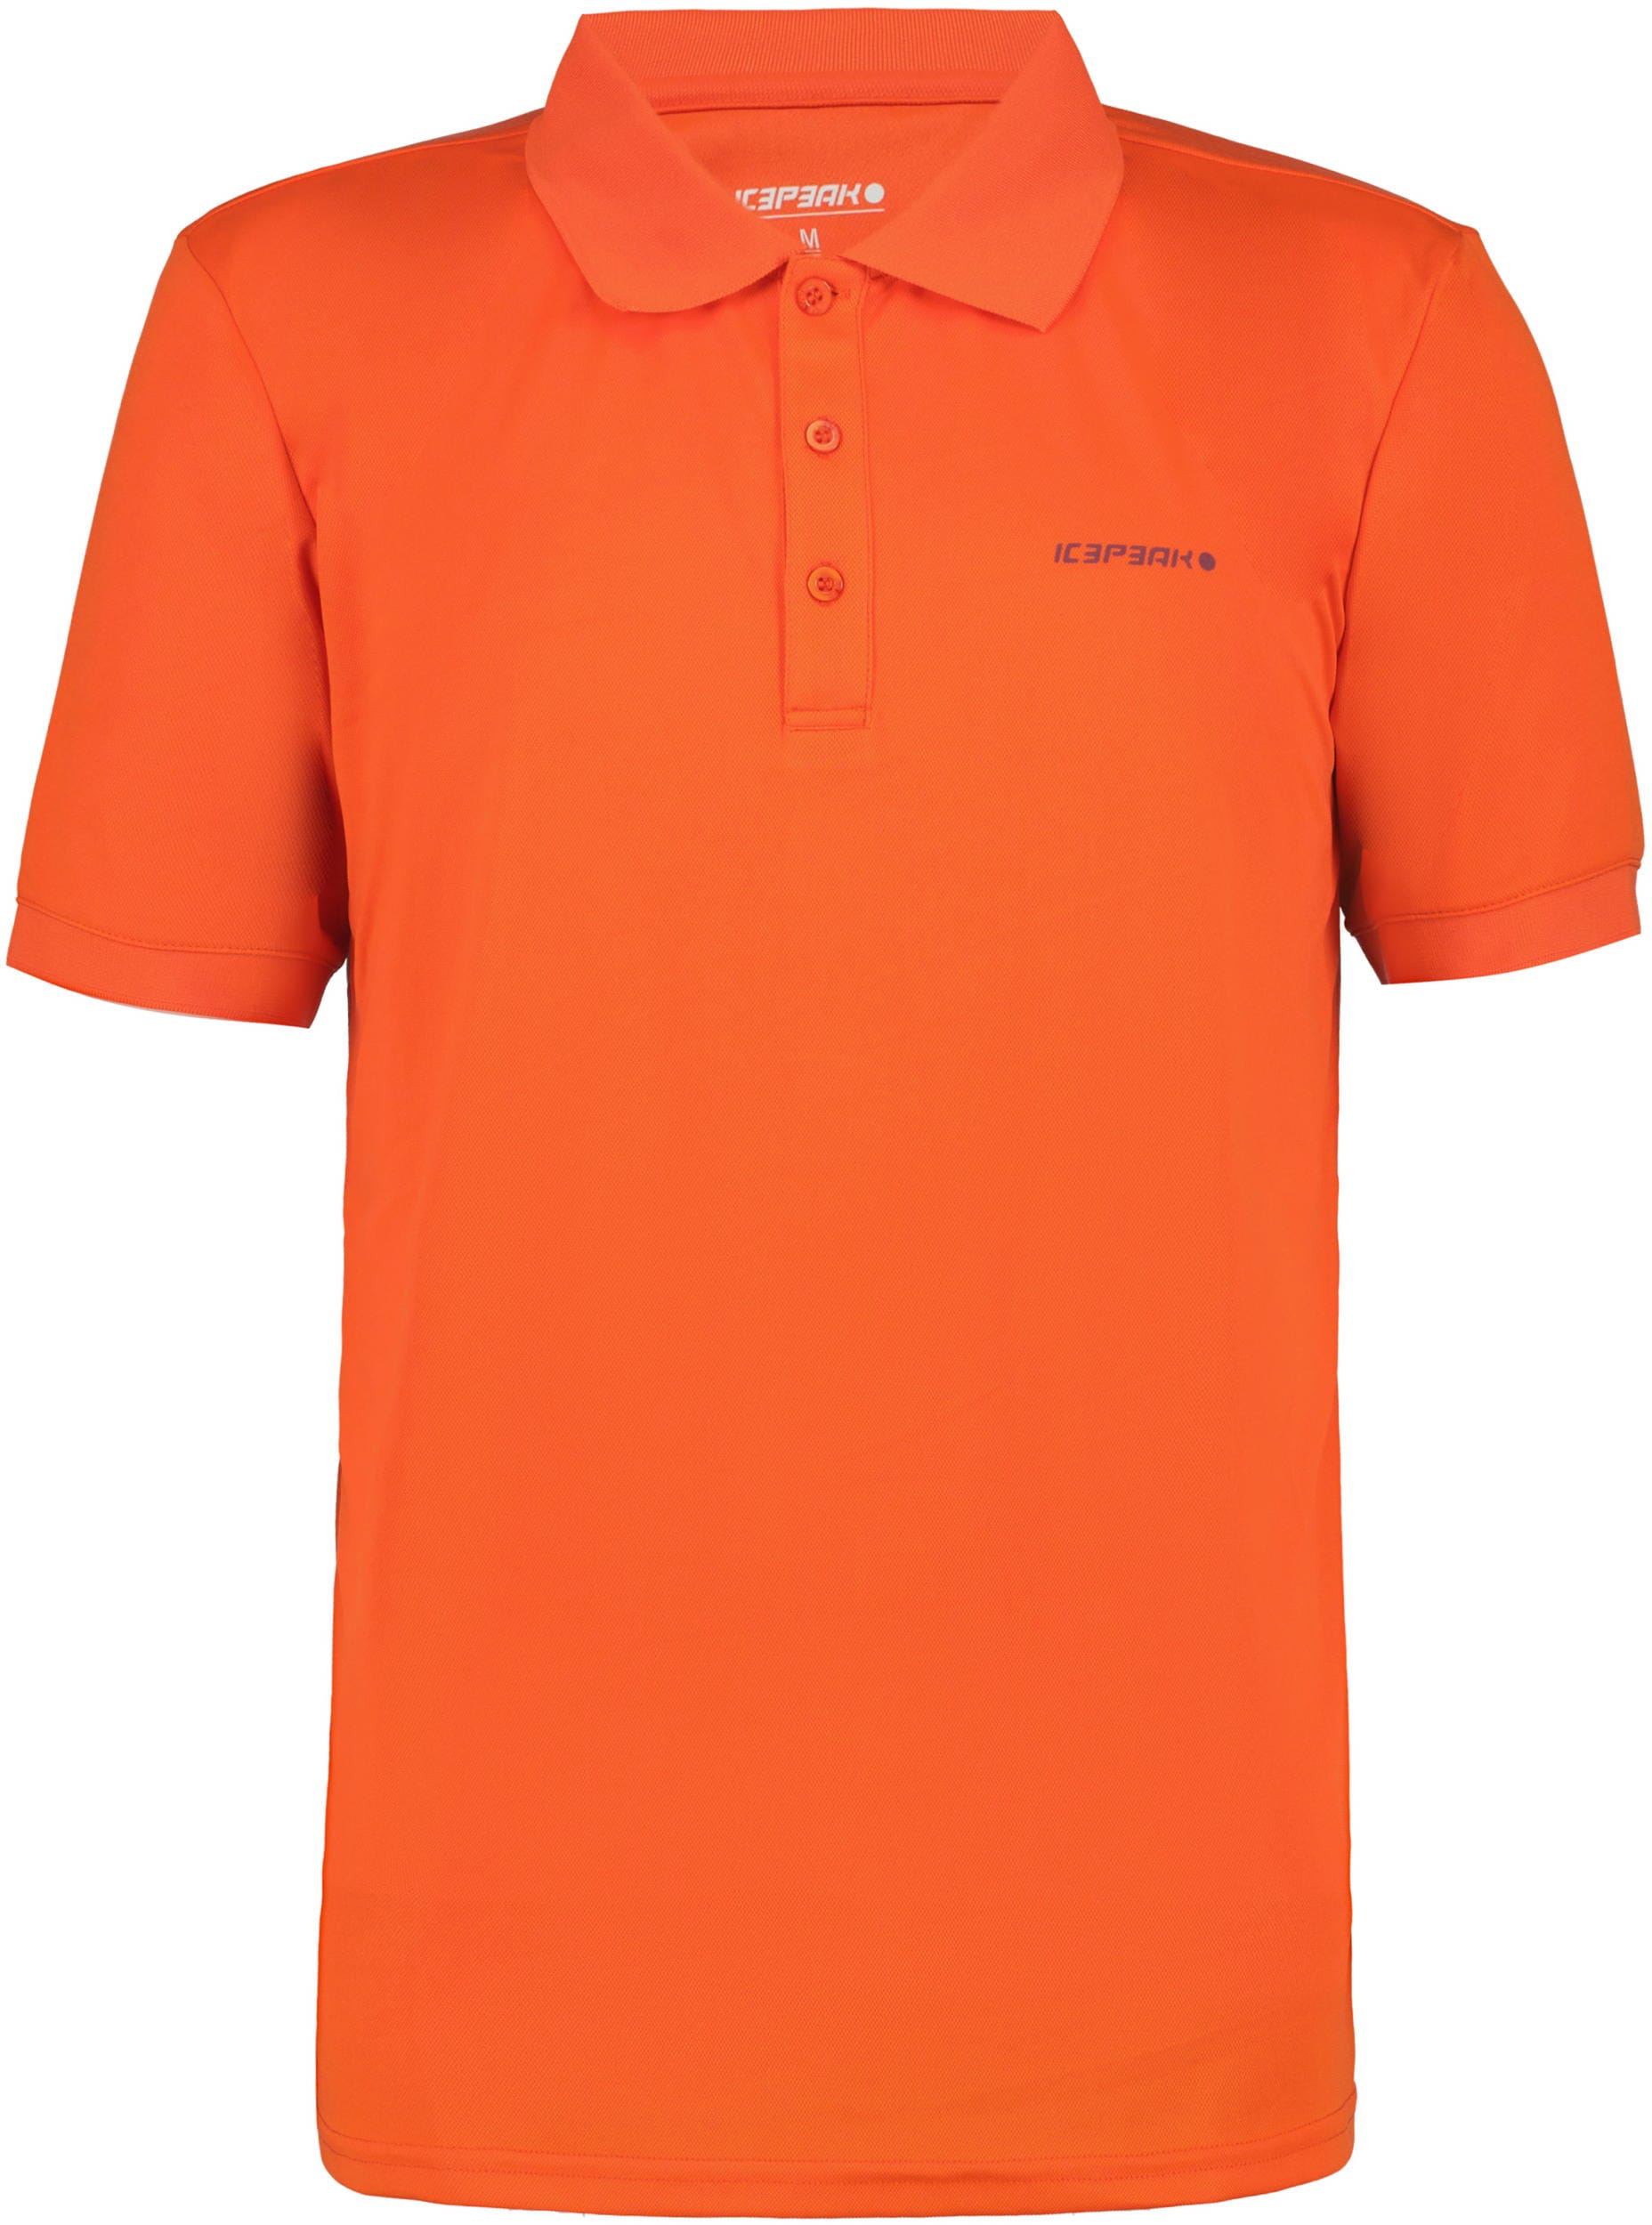 Icepeak Bellmont Polo, red